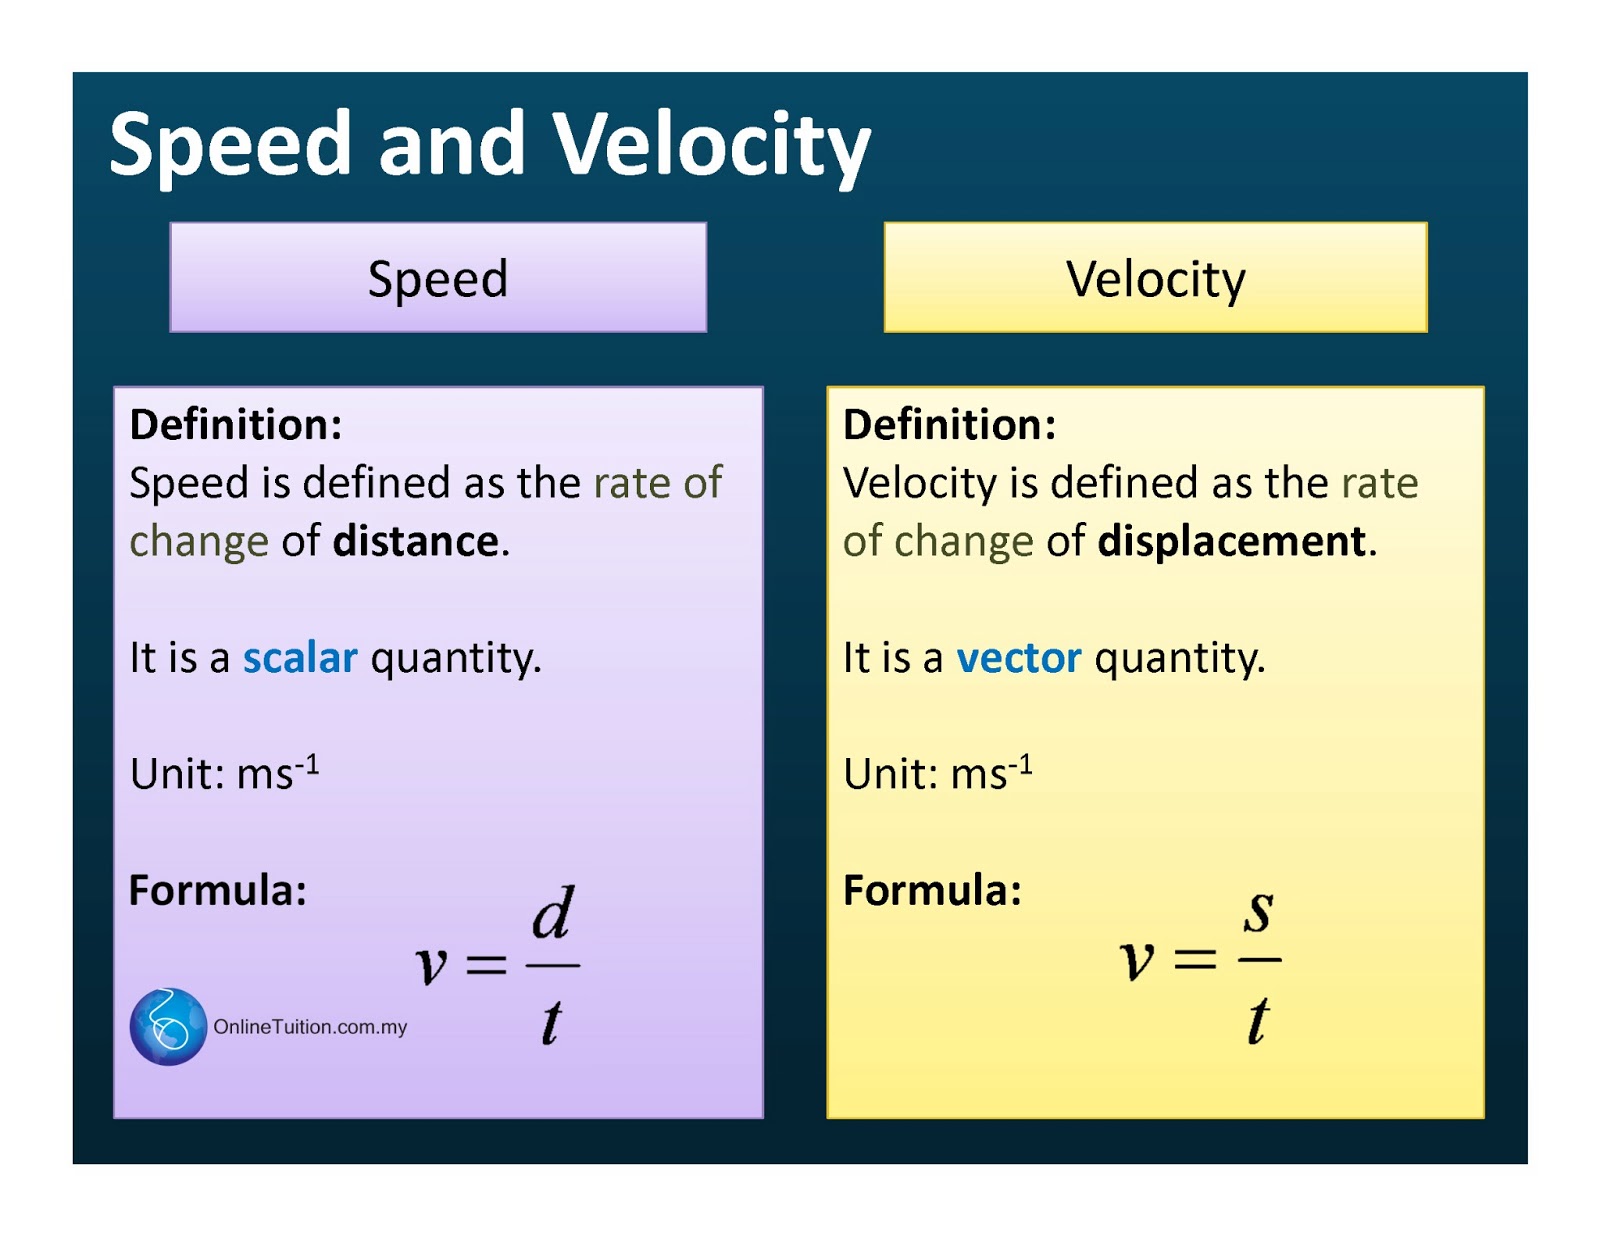 Force-Velocity Curves – the Good, the Bad, the Ugly